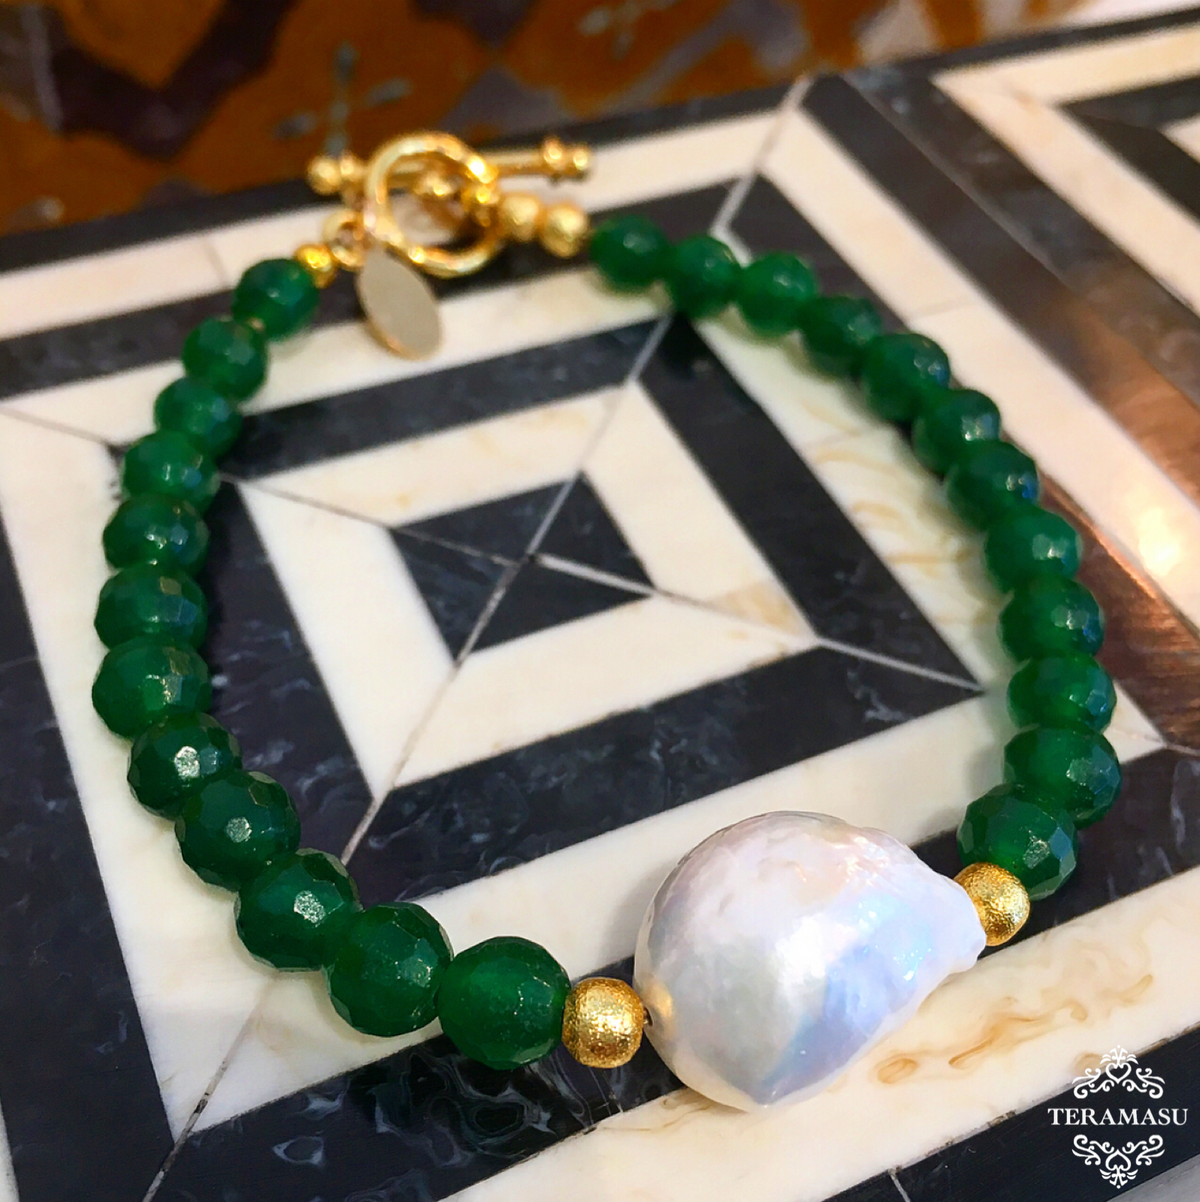 Must-Have Monday: Gorgeous & New, Handmade Designer Teramasu Faceted Green Agate and Gold Bead Bracelet with Baroque Pearl